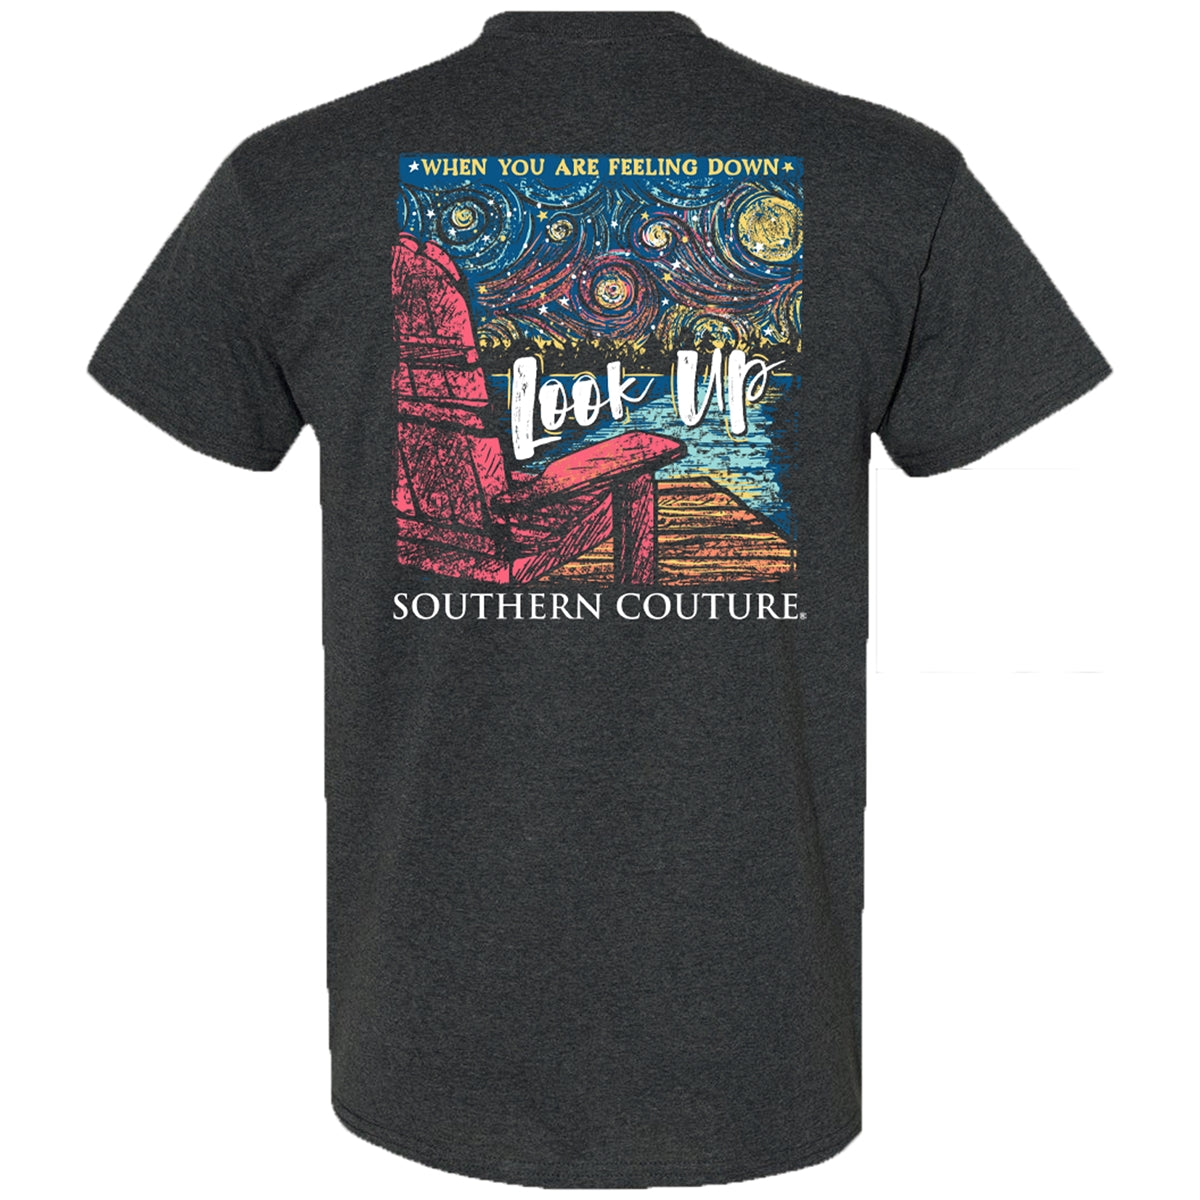 Southern Couture Classic When Feeling Down T-Shirt